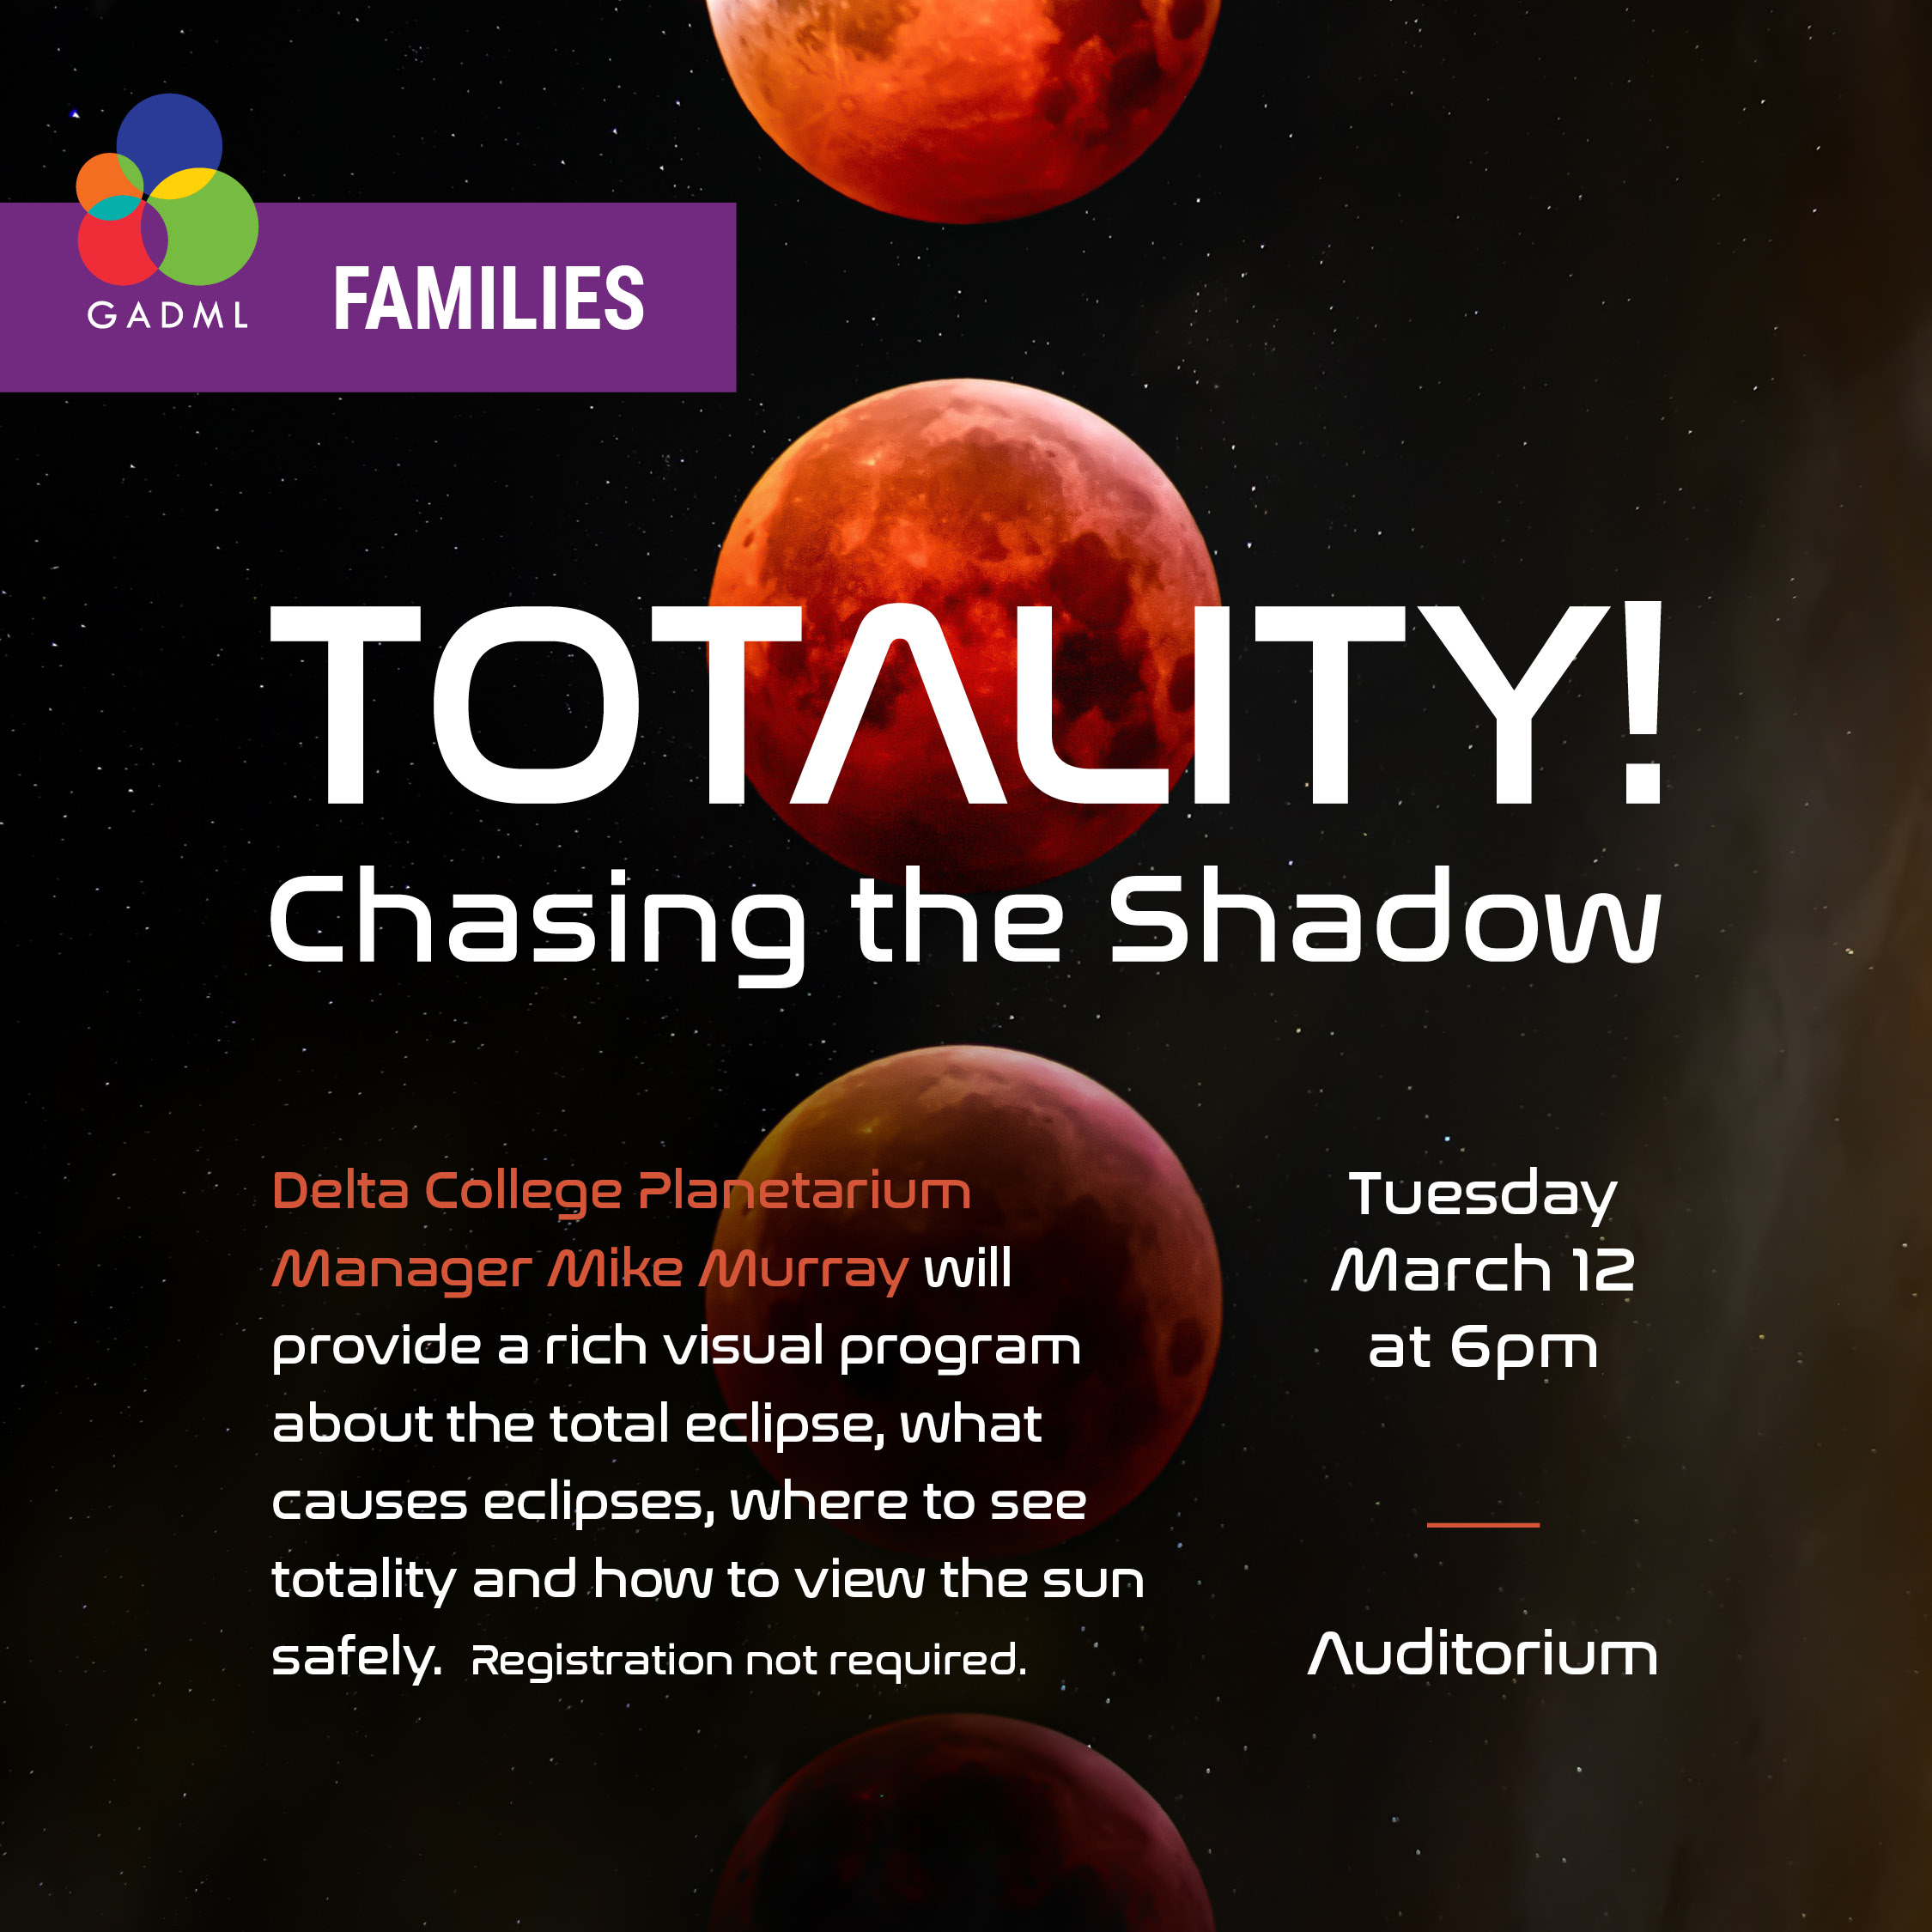 Totality! Chasing the Shadow